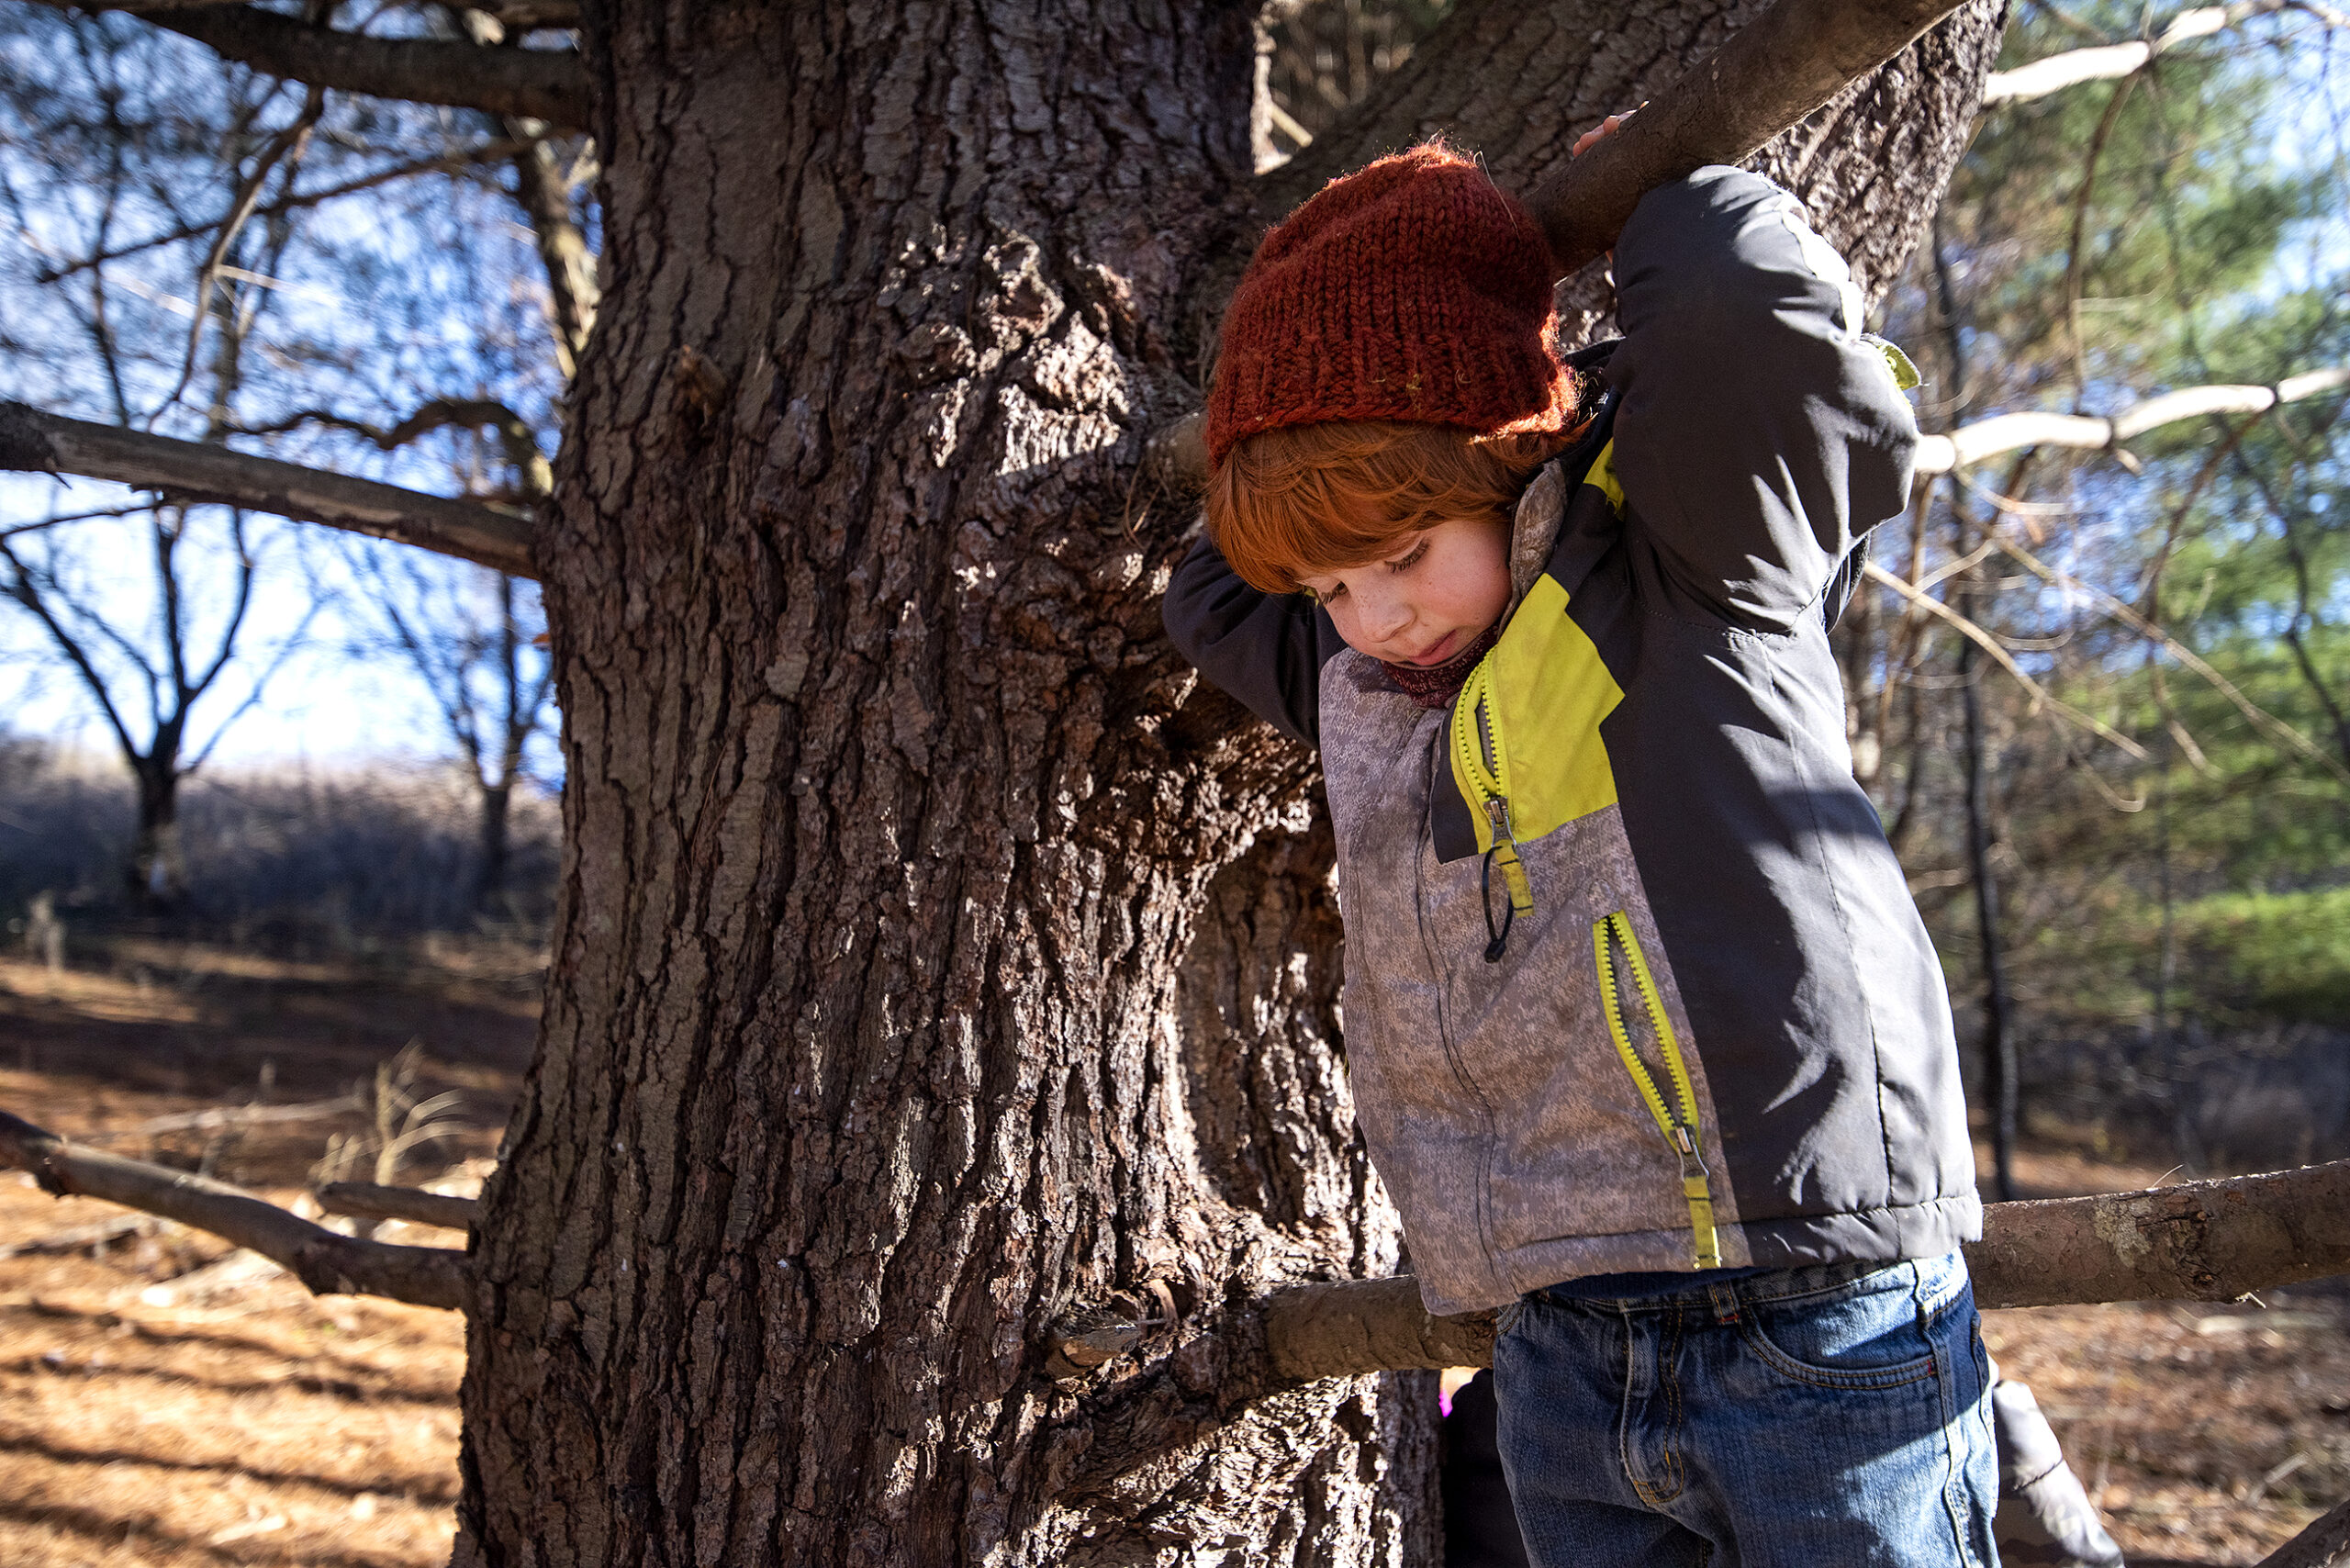 A boy with red hair grabs on to the branch of a tree.